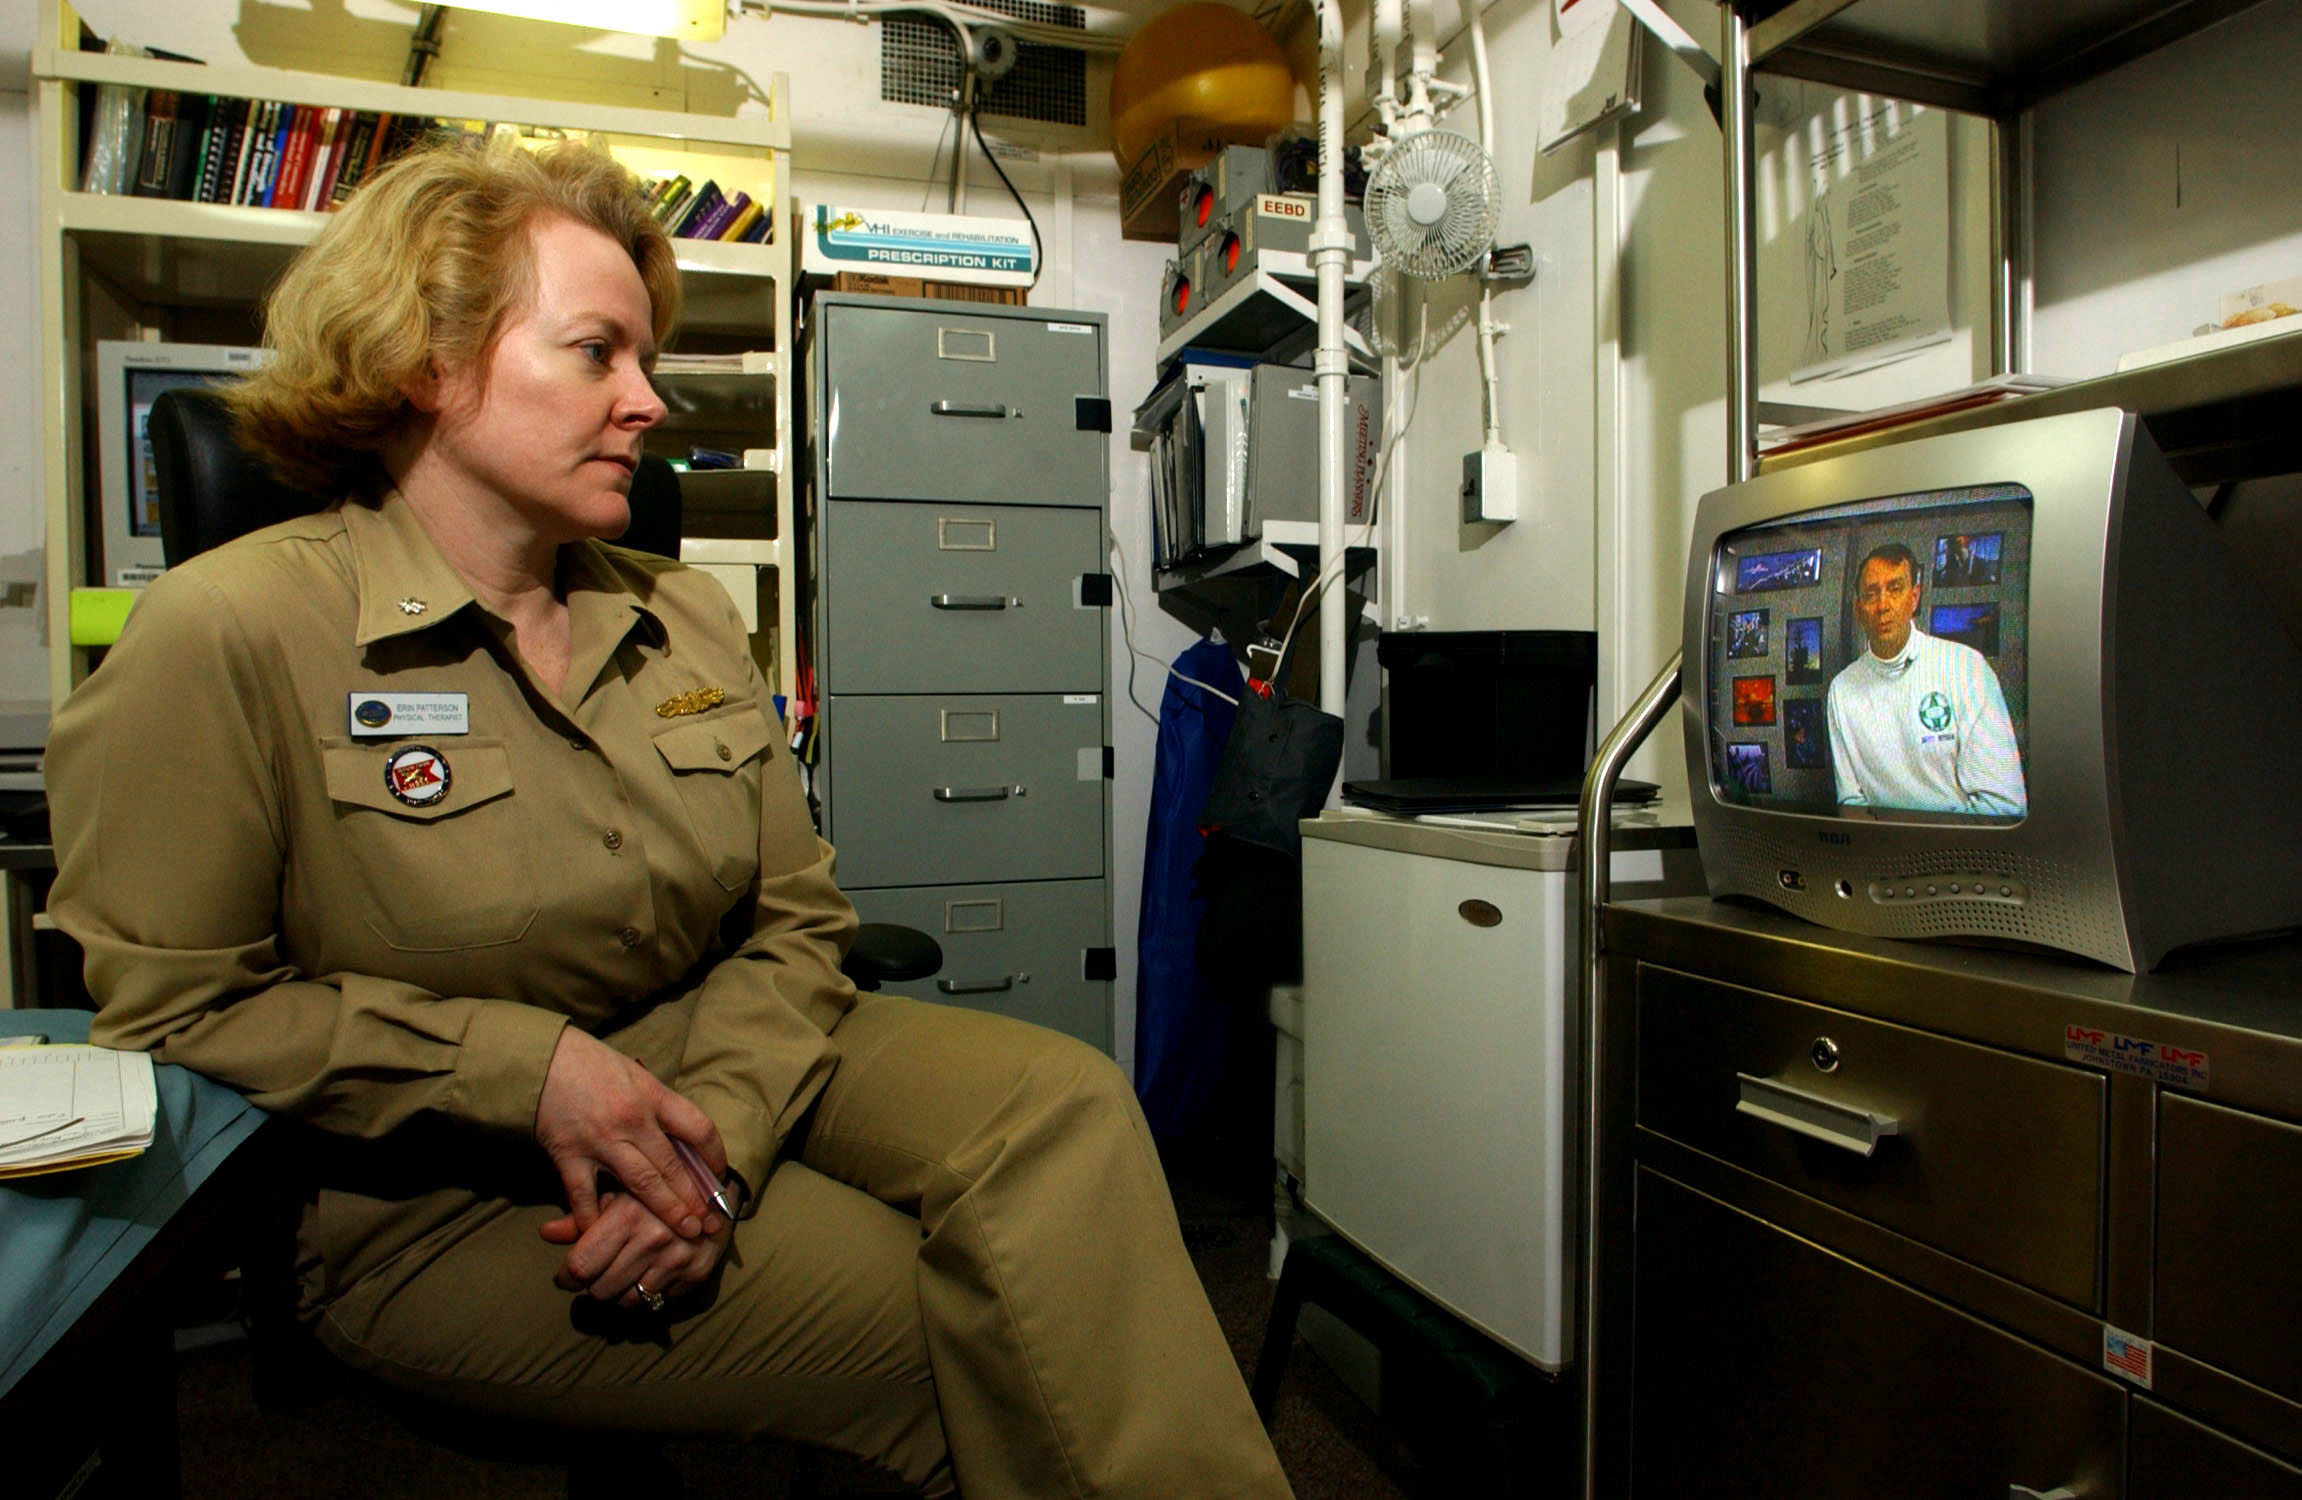 US Navy 030316-N-4308O-015 Cdr. Erin Patterson, Medical Officer aboard USS Harry S. Truman (CVN 75), watches a 'safety stand-down video' in her office